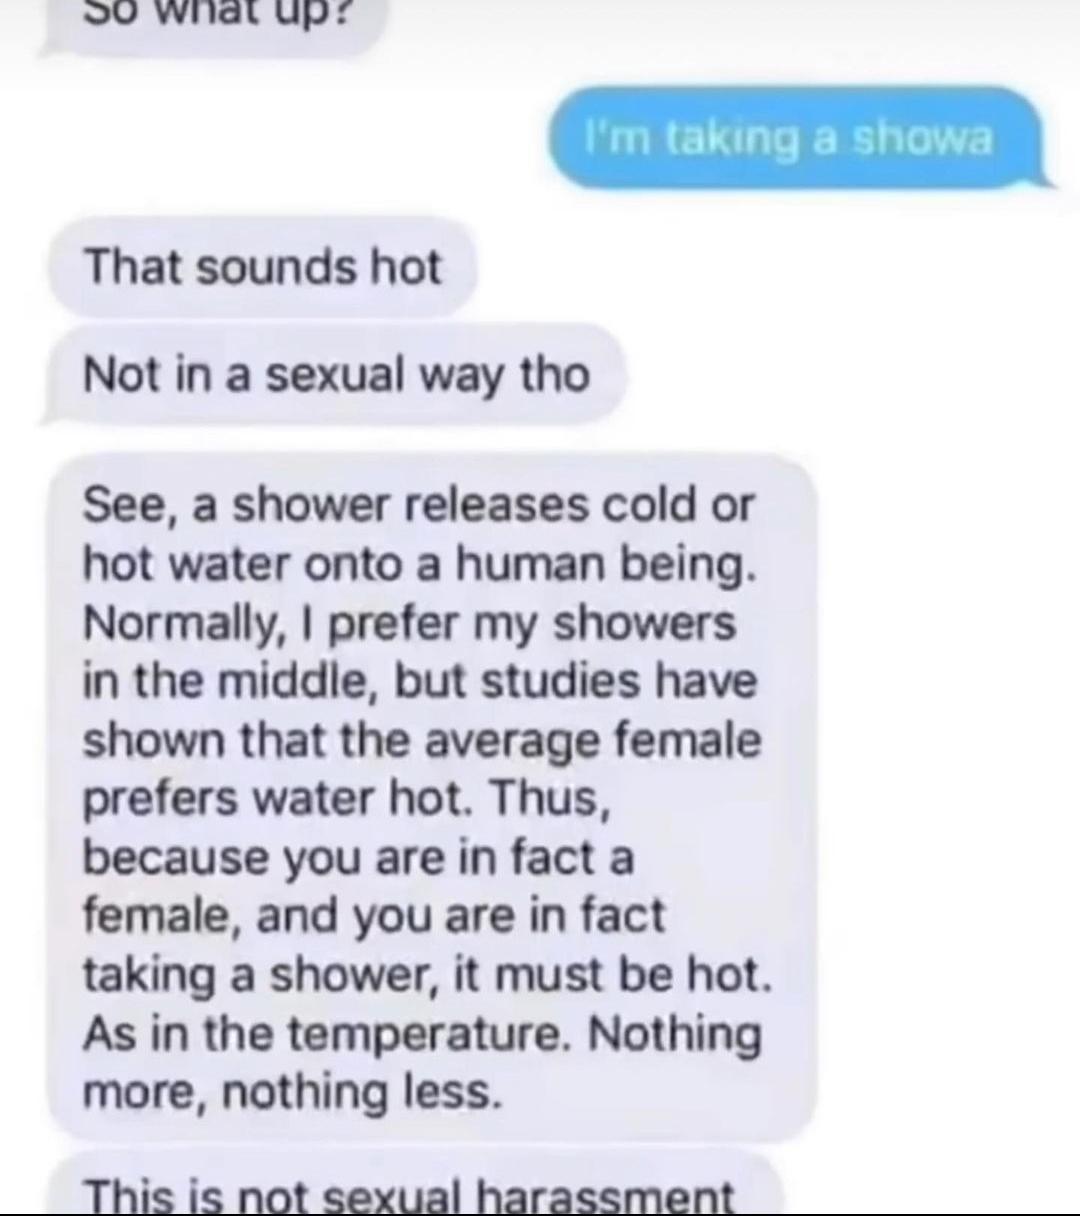 dank memes - but studies have shown the average female prefers water hot - So wn up? That sounds hot Not in a sexual way tho See, a shower releases cold or hot water onto a human being. Normally, I prefer my showers in the middle, but studies have shown t